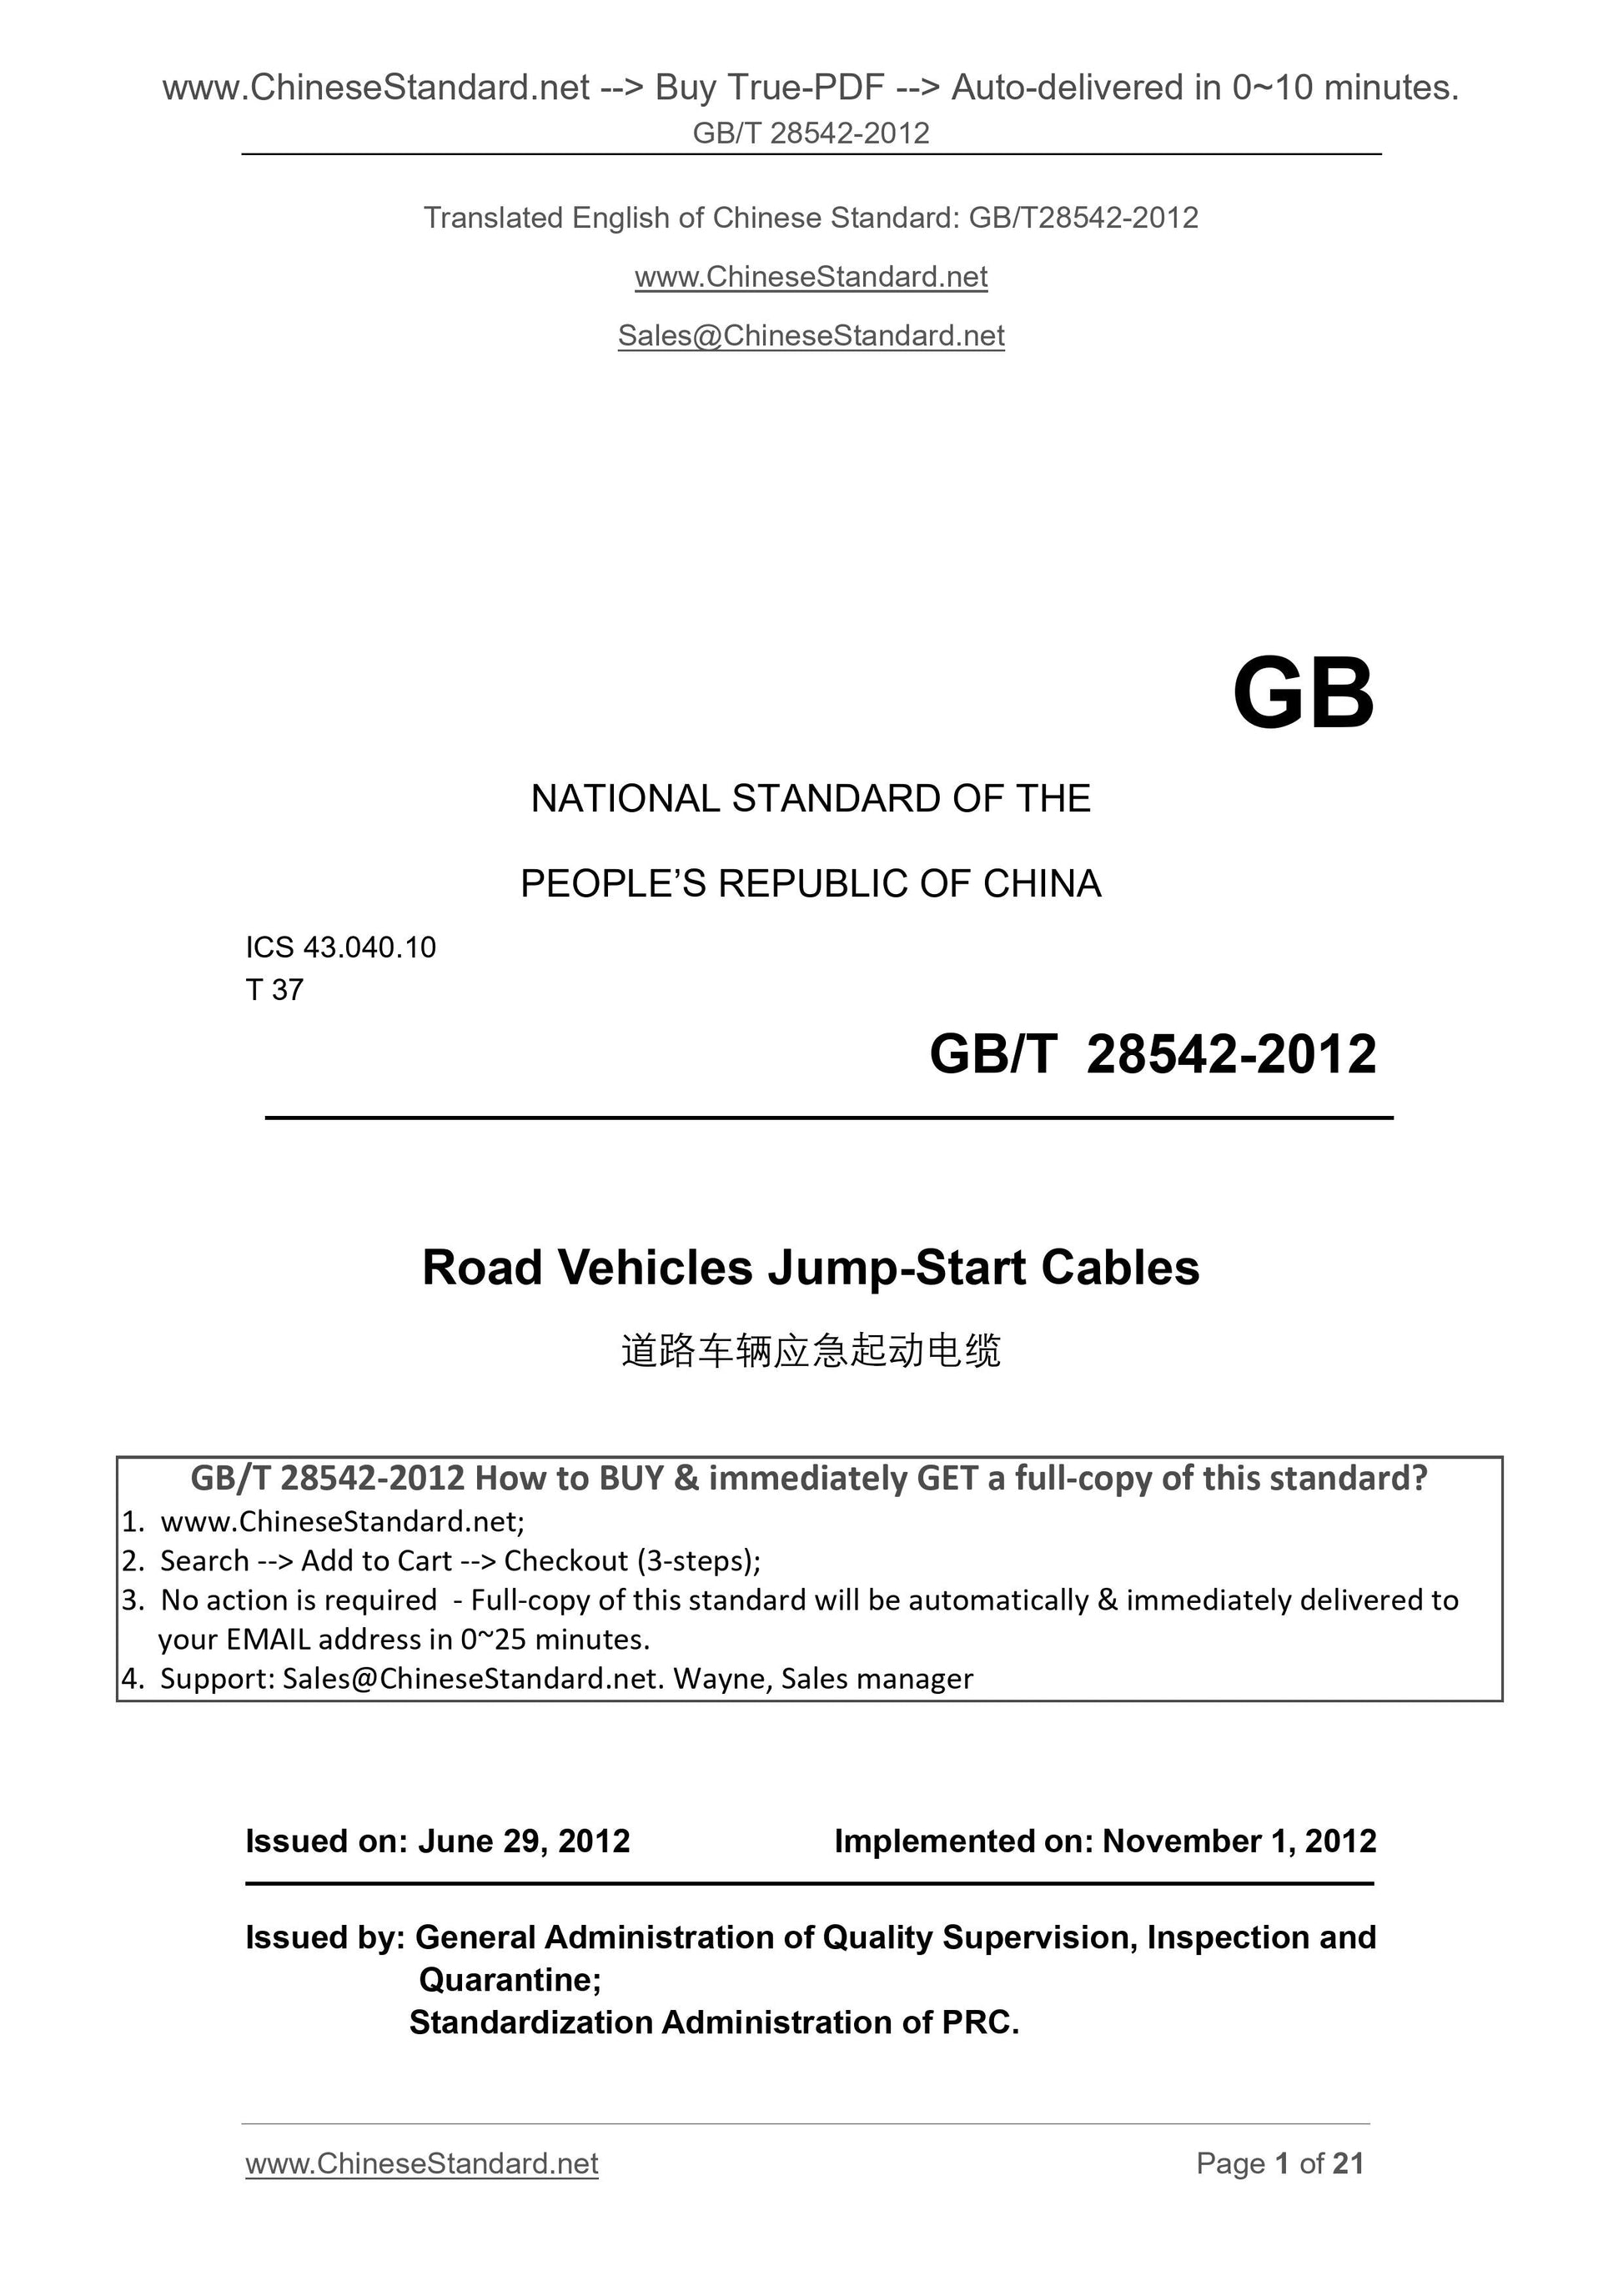 GB/T 28542-2012 Page 1